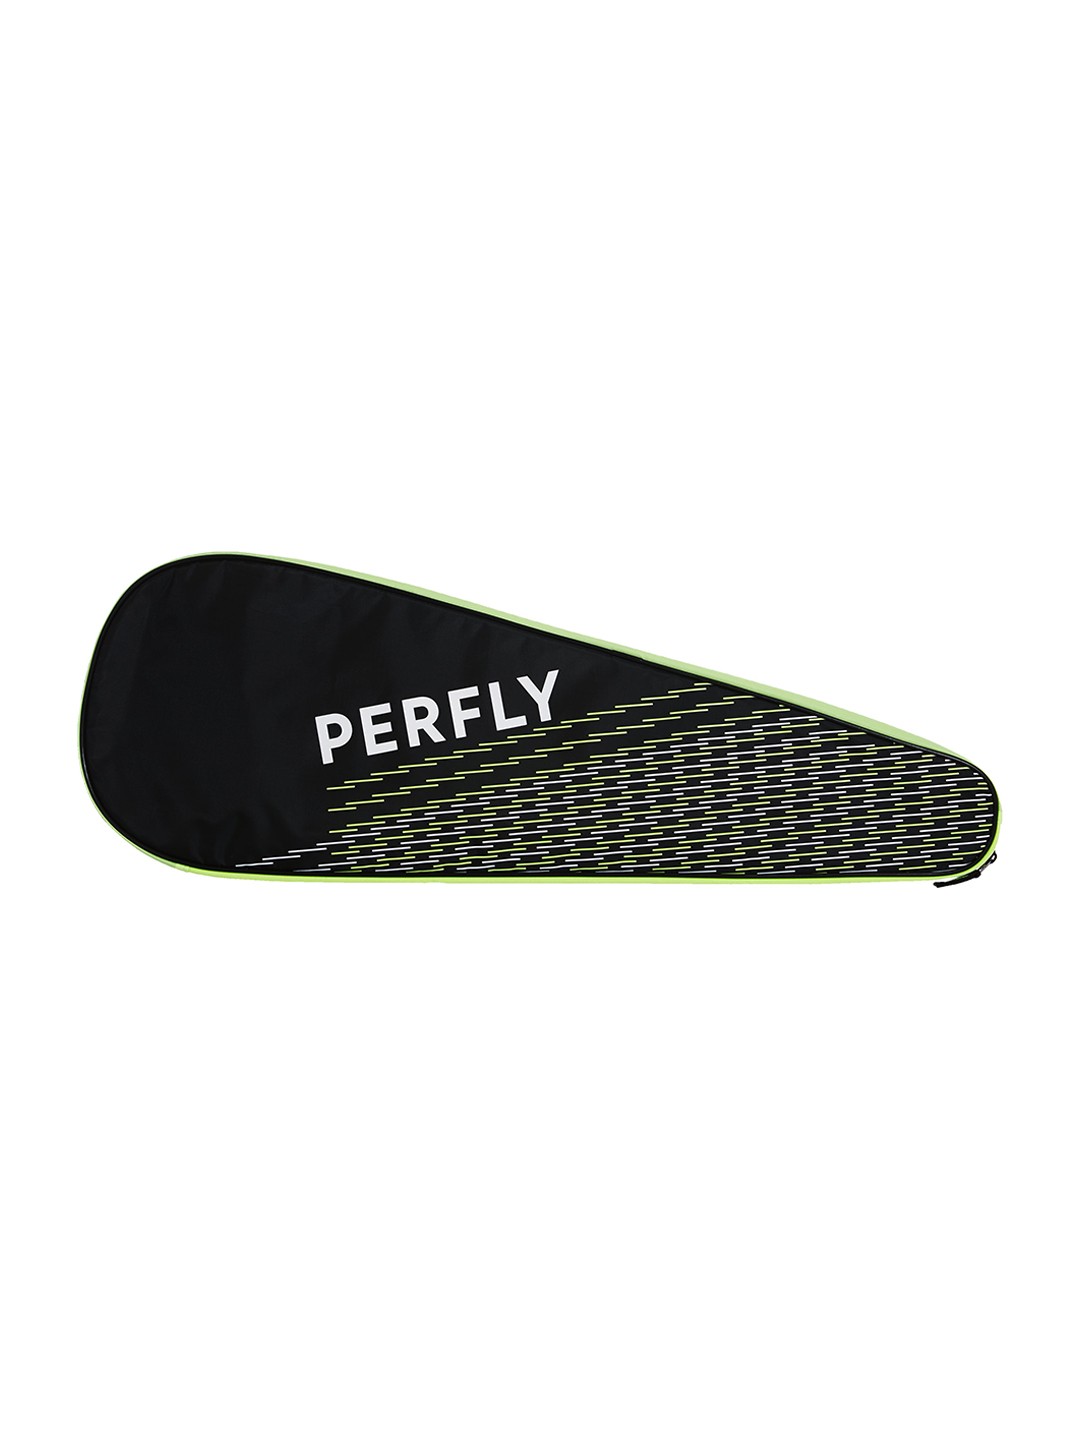 Accessories Duffel Bag | PERFLY By Decathlon Unisex Green 190 Eco Badminton Cover - JP58107